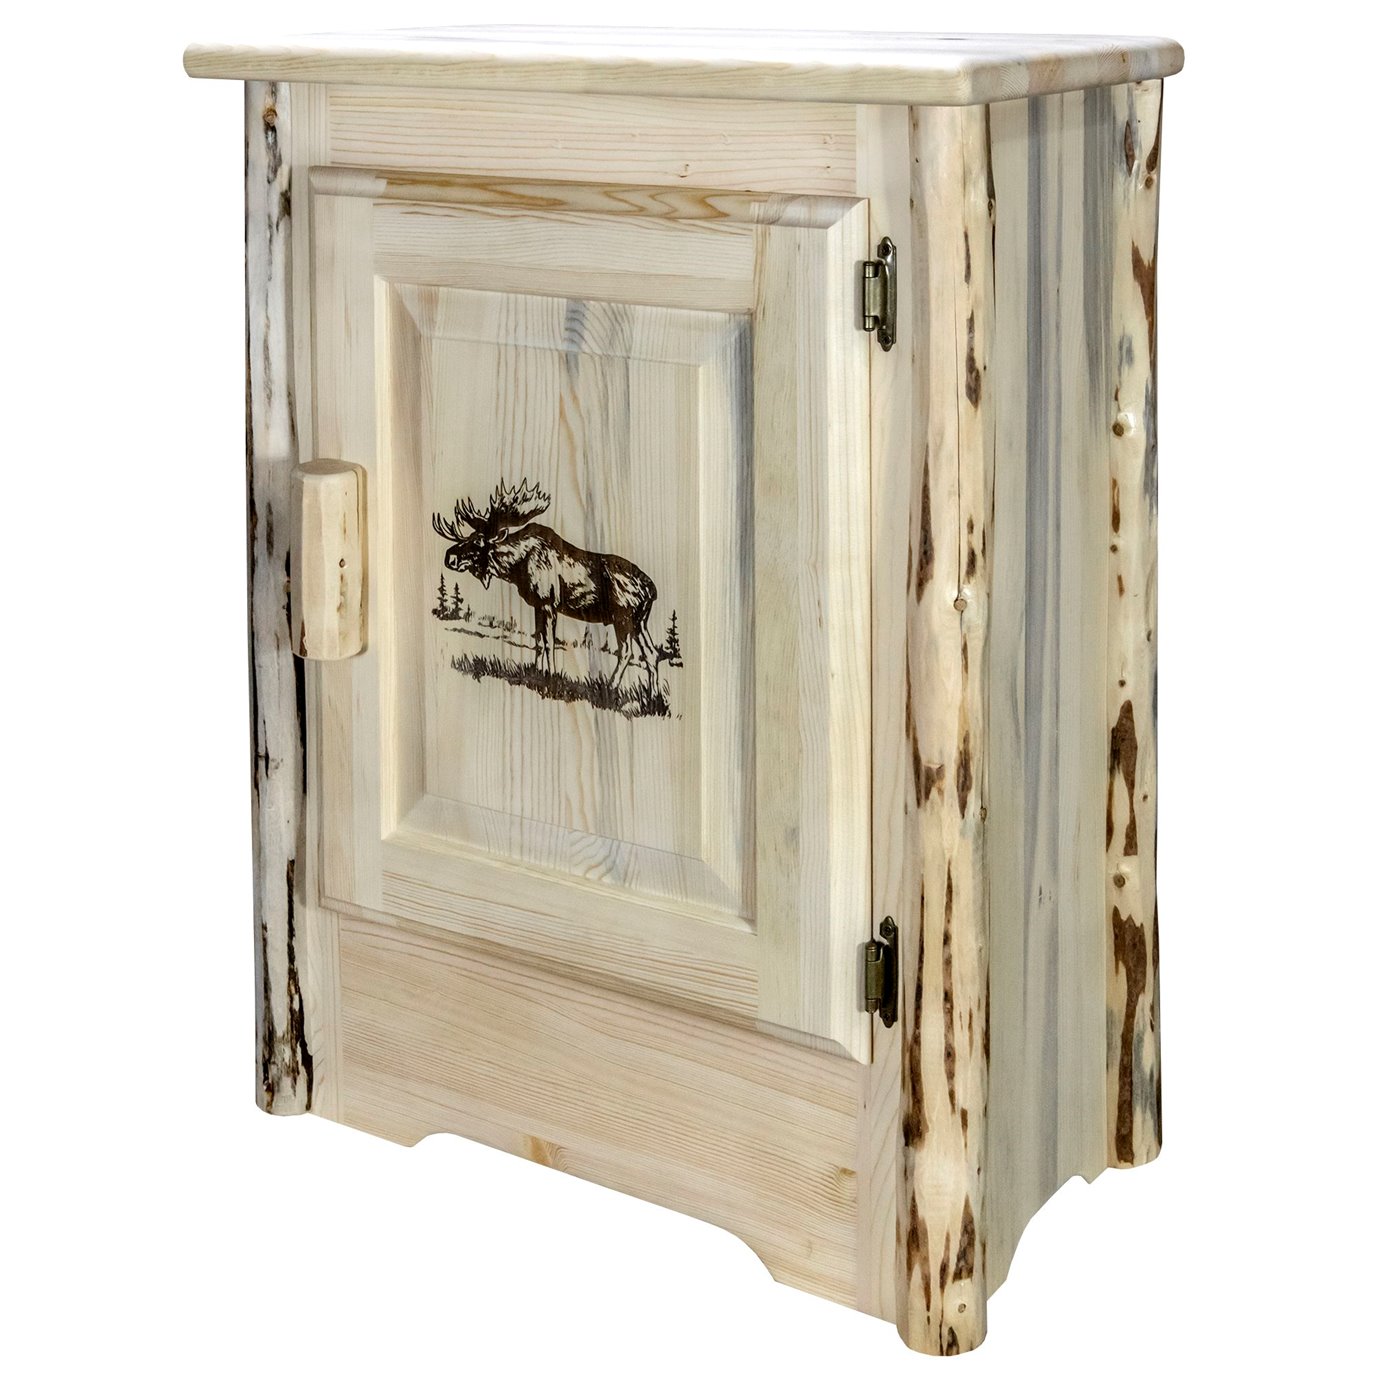 Montana Right Hinged Accent Cabinet w/ Laser Engraved Moose Design - Clear Lacquer Finish